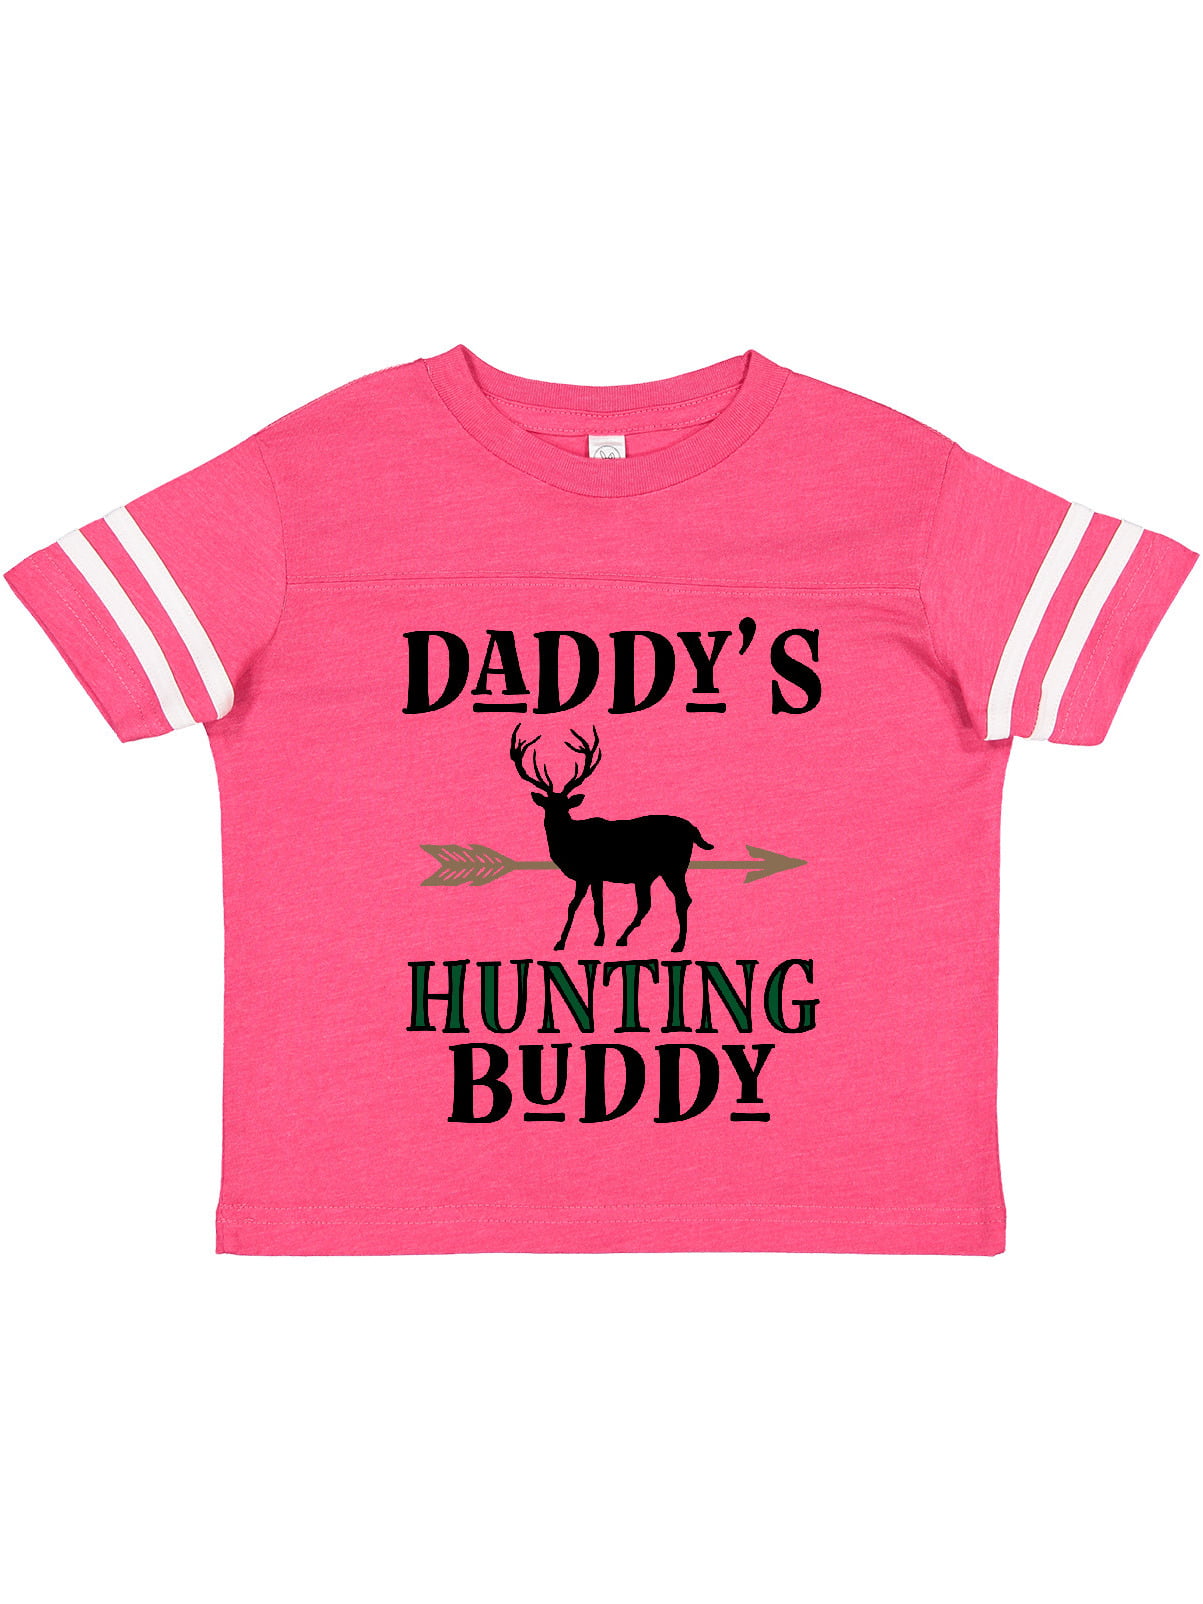 T Shirt For Kids Daddy's Hunting Buddy